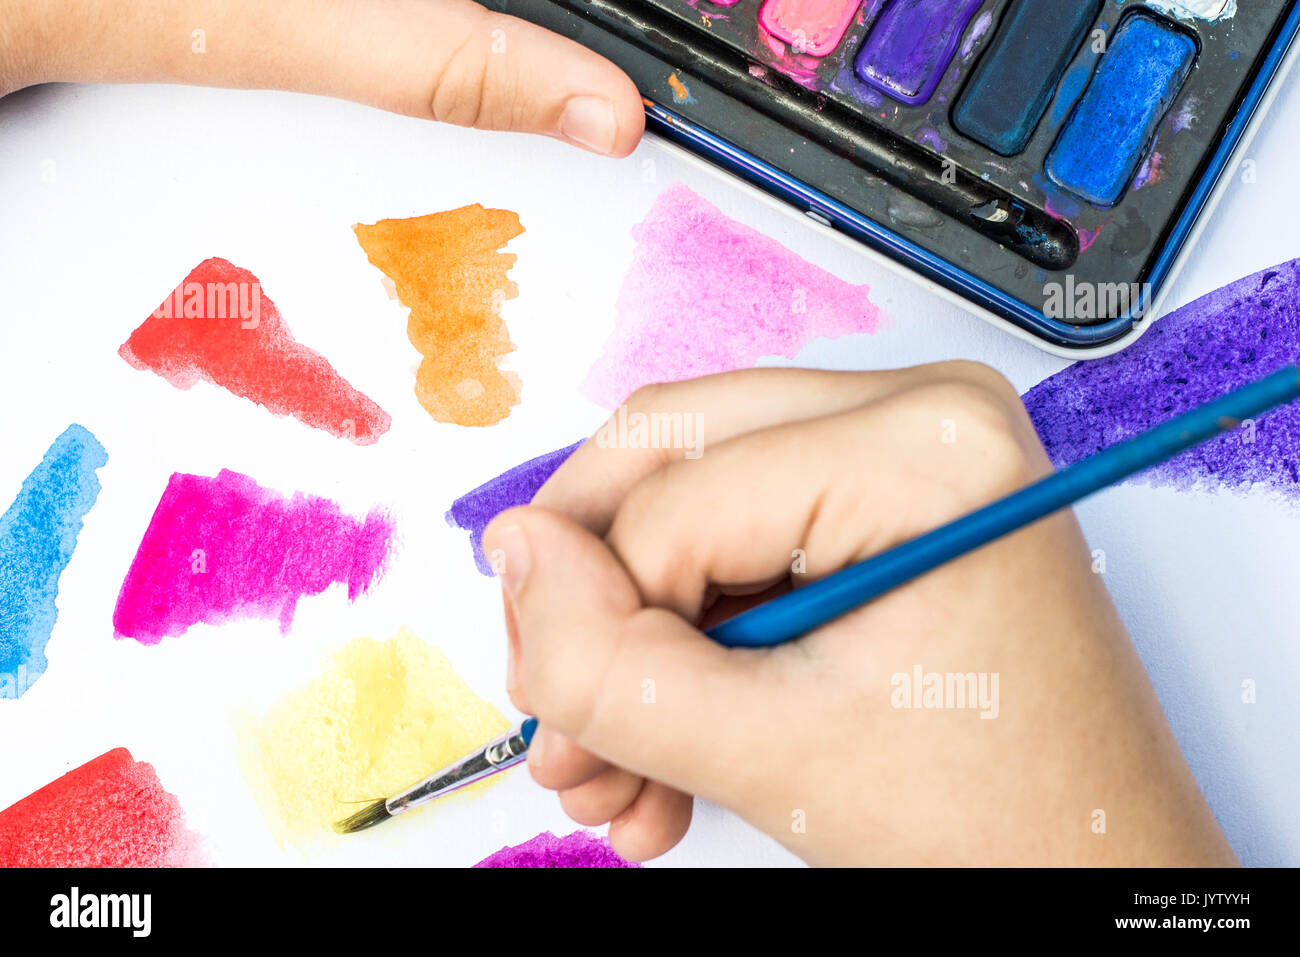 Child Painting With Watercolor Paints on a White Paper Book In Natural Light Stock Photo